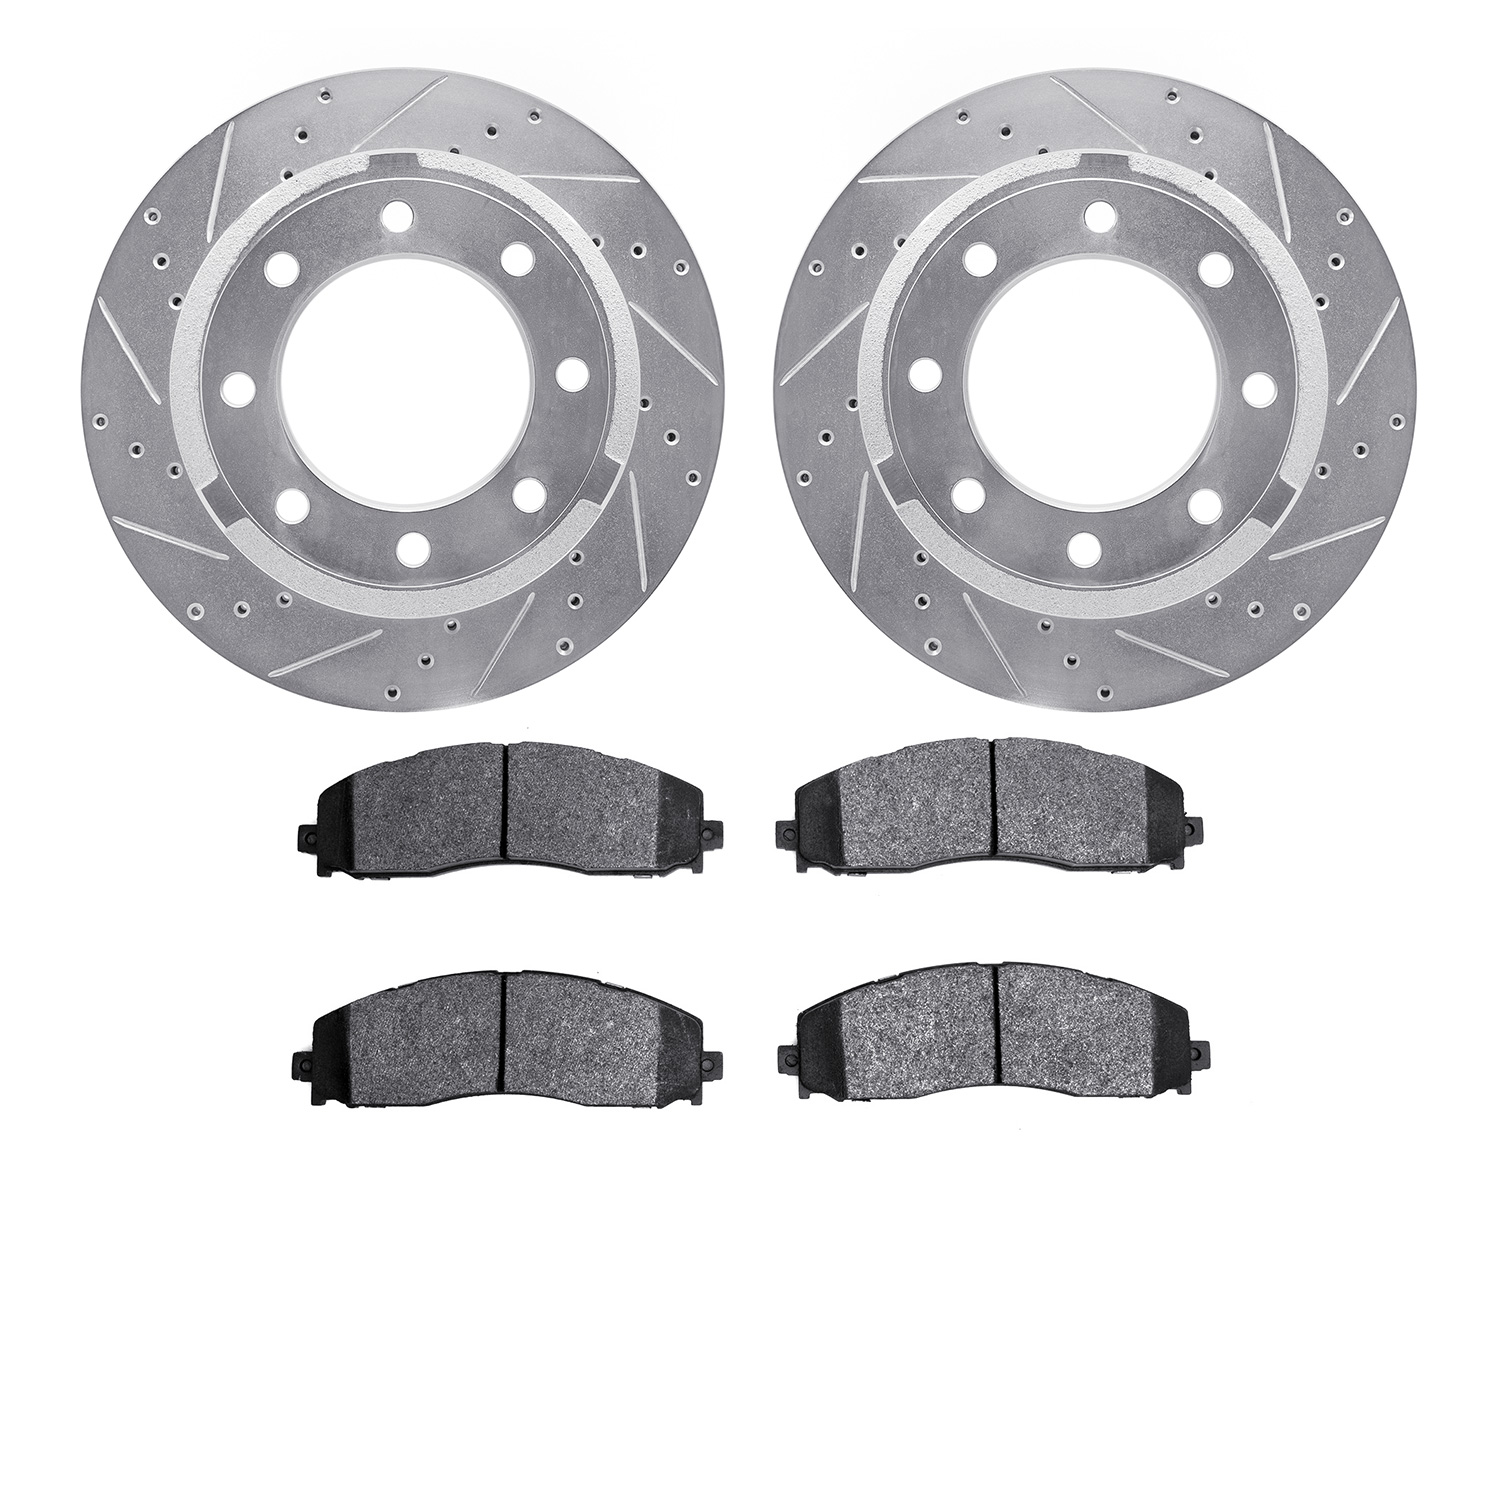 7502-99687 Drilled/Slotted Brake Rotors w/5000 Advanced Brake Pads Kit [Silver], Fits Select Ford/Lincoln/Mercury/Mazda, Positio